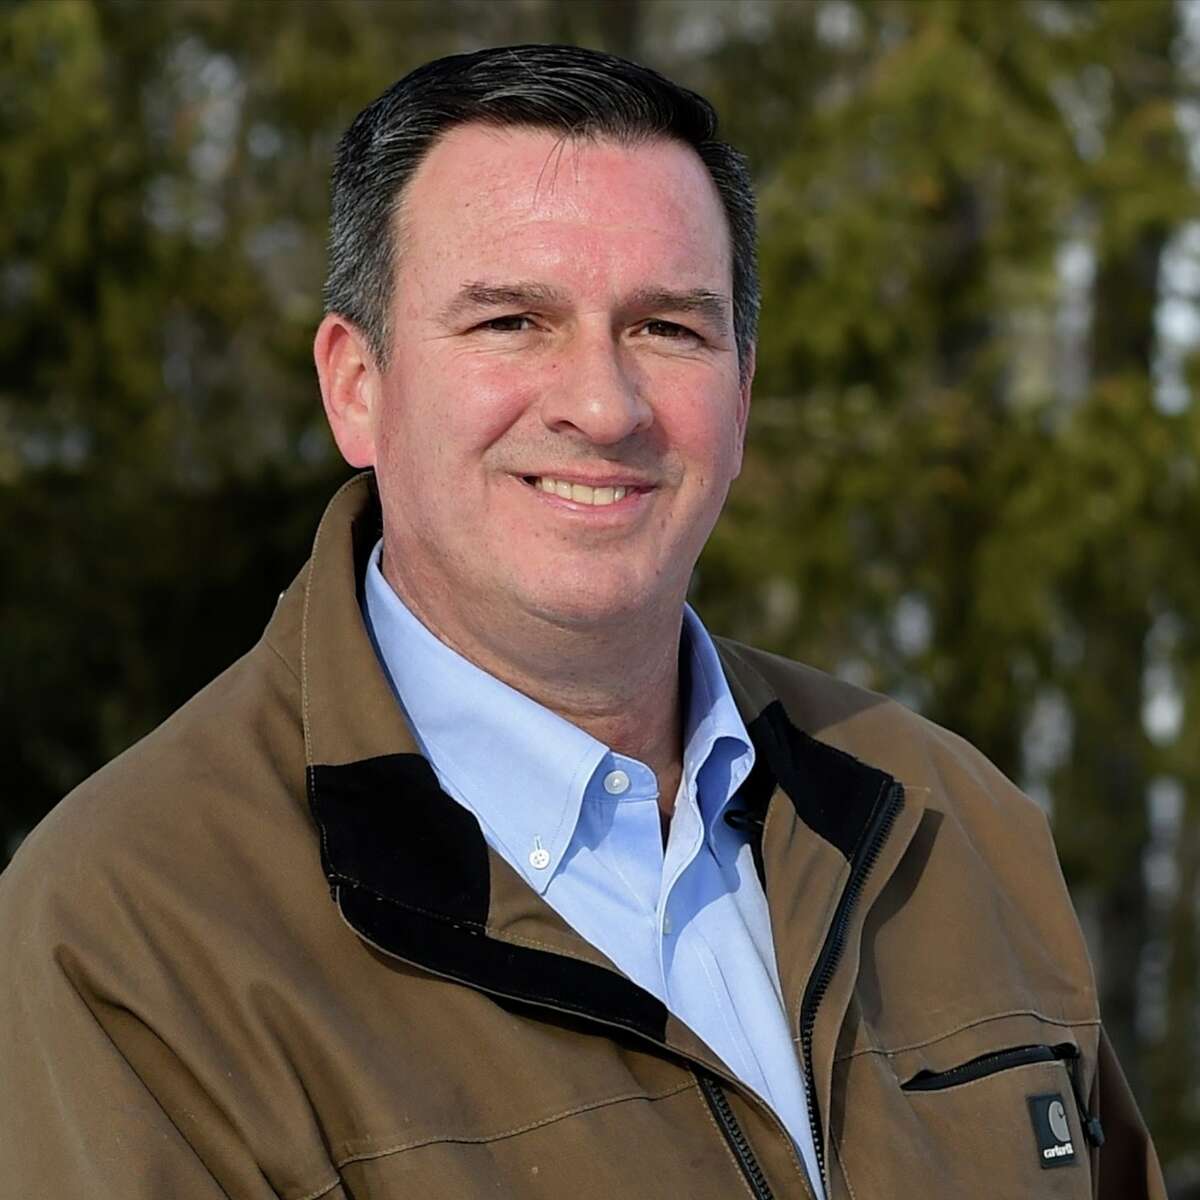 Rich Amedure, a retired state trooper, is the GOP candidate for the 46th state Senate District.